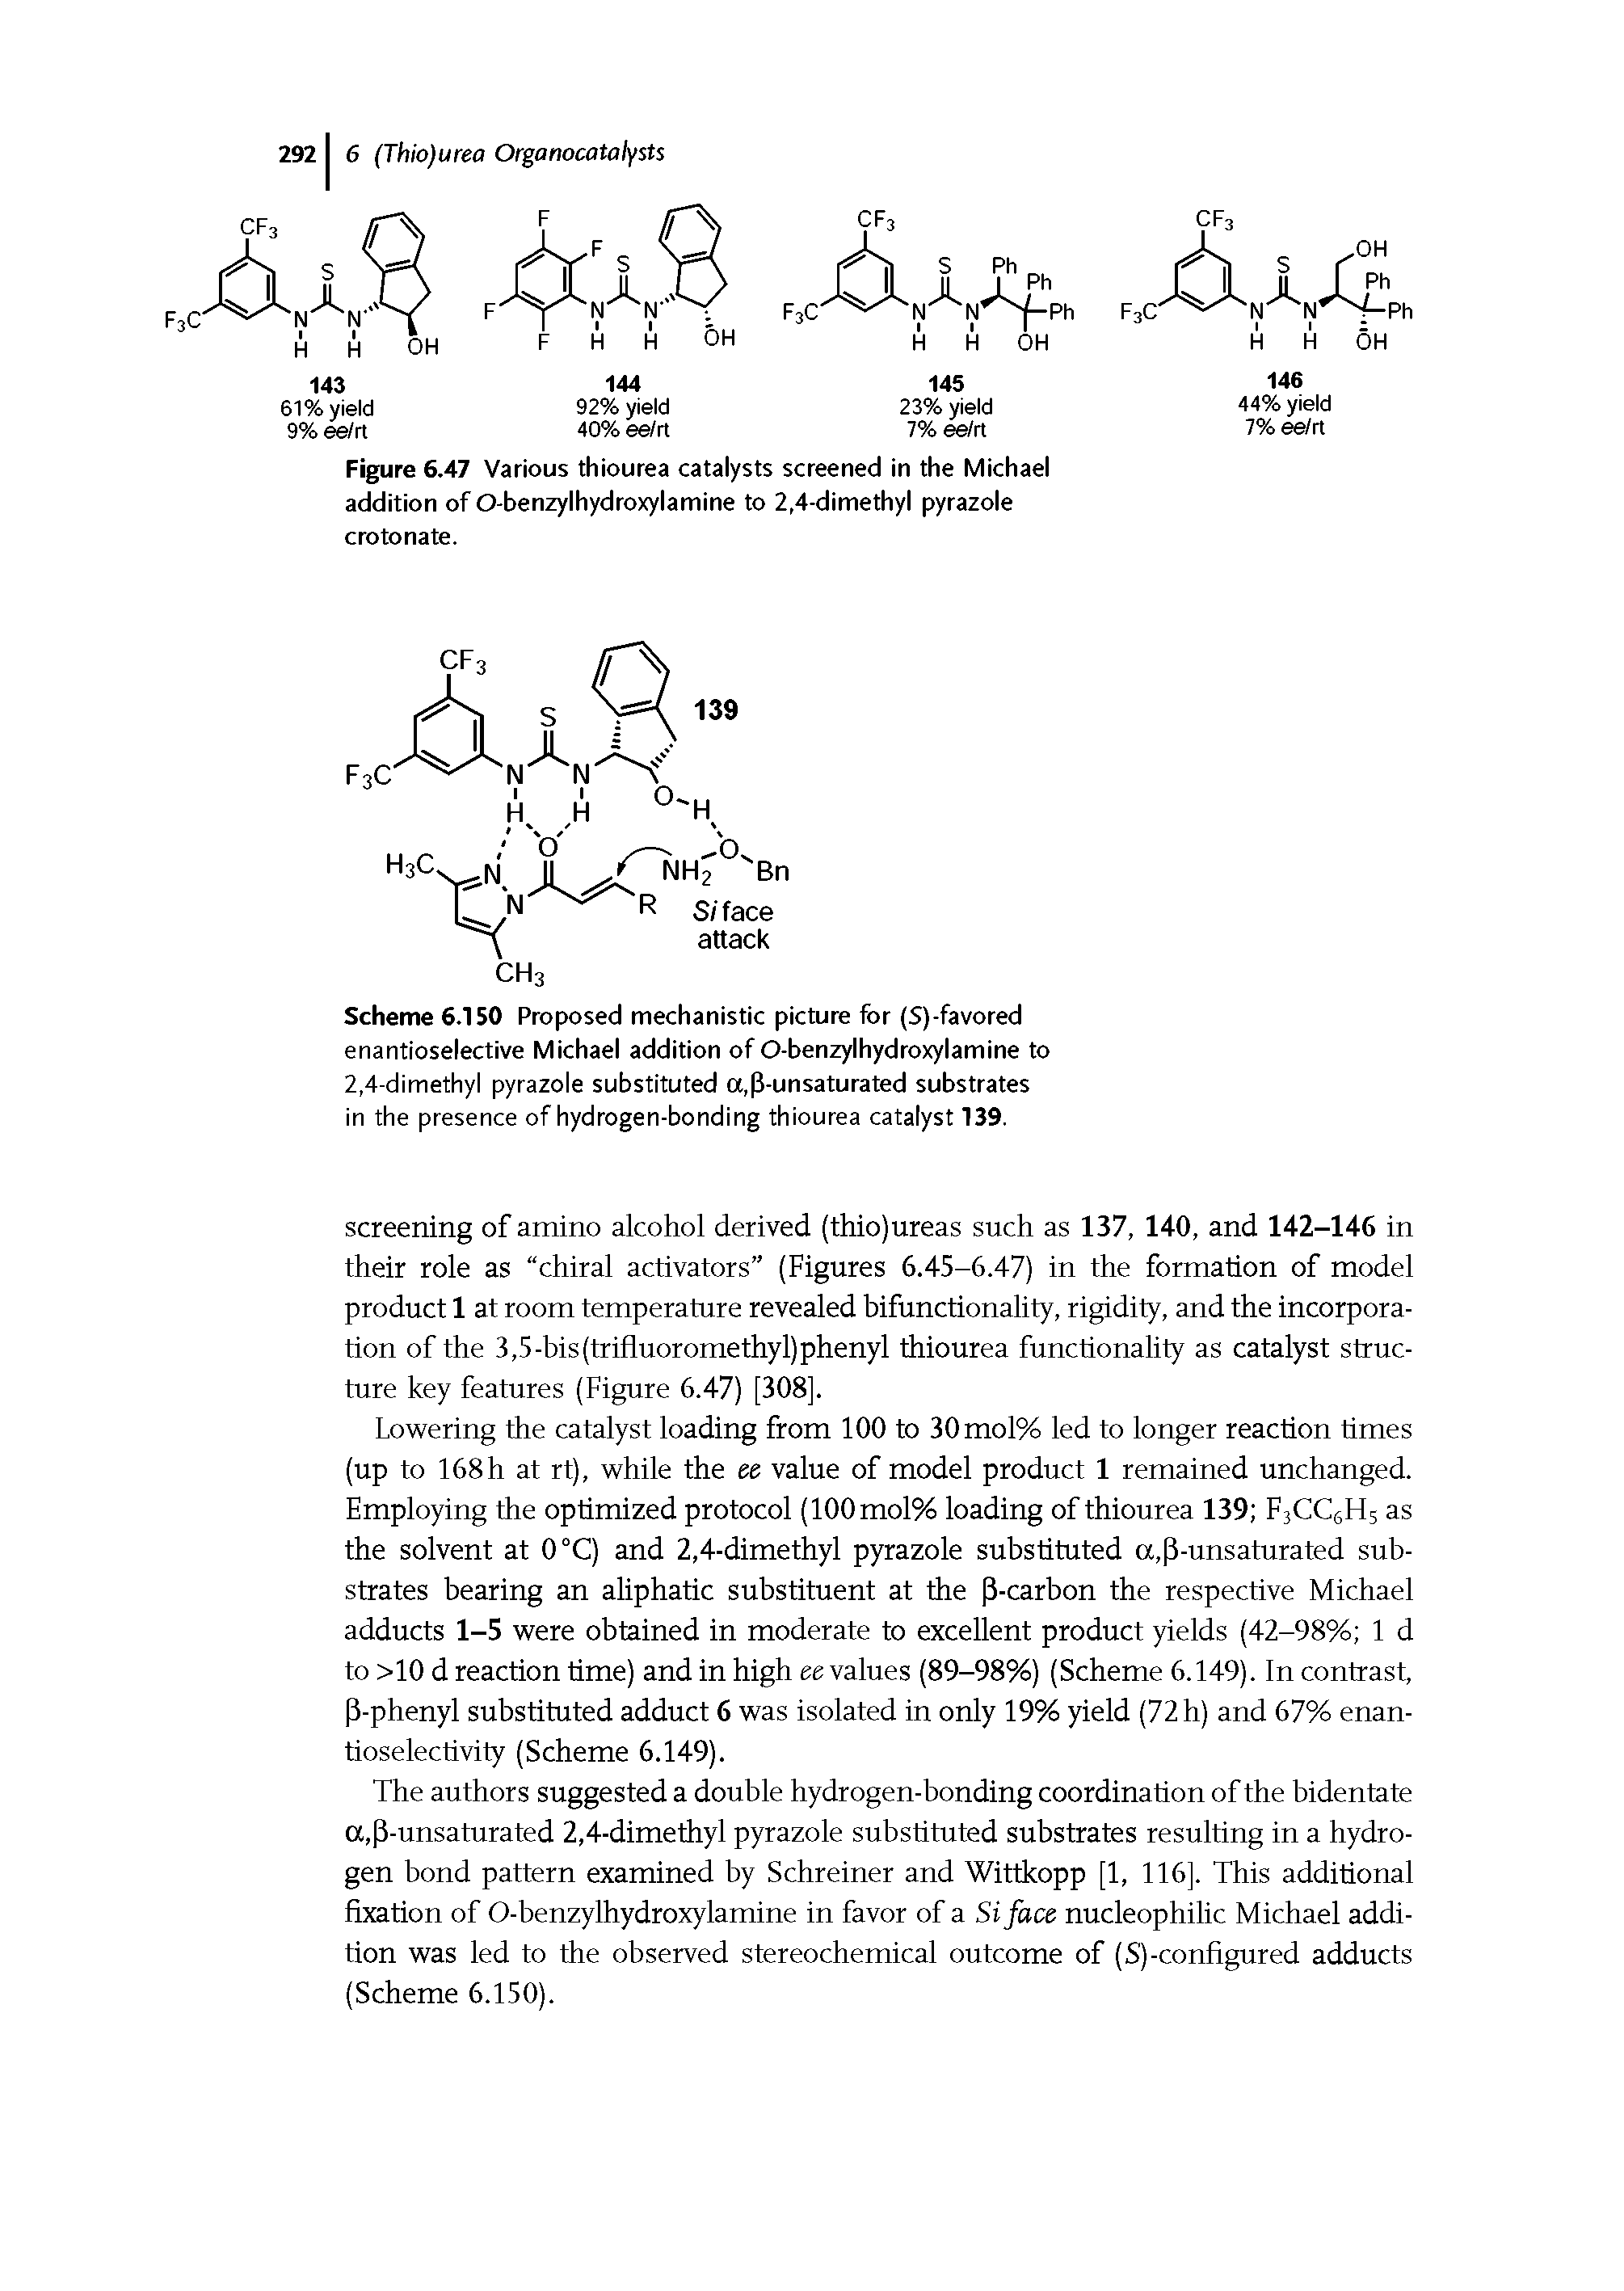 Scheme 6.150 Proposed mechanistic picture for (S)-favored enantioselective Michael addition of O-benzylhydroxylamine to 2,4-dimethyl pyrazole substituted a,P-unsaturated substrates in the presence of hydrogen-bonding thiourea catalyst 139.